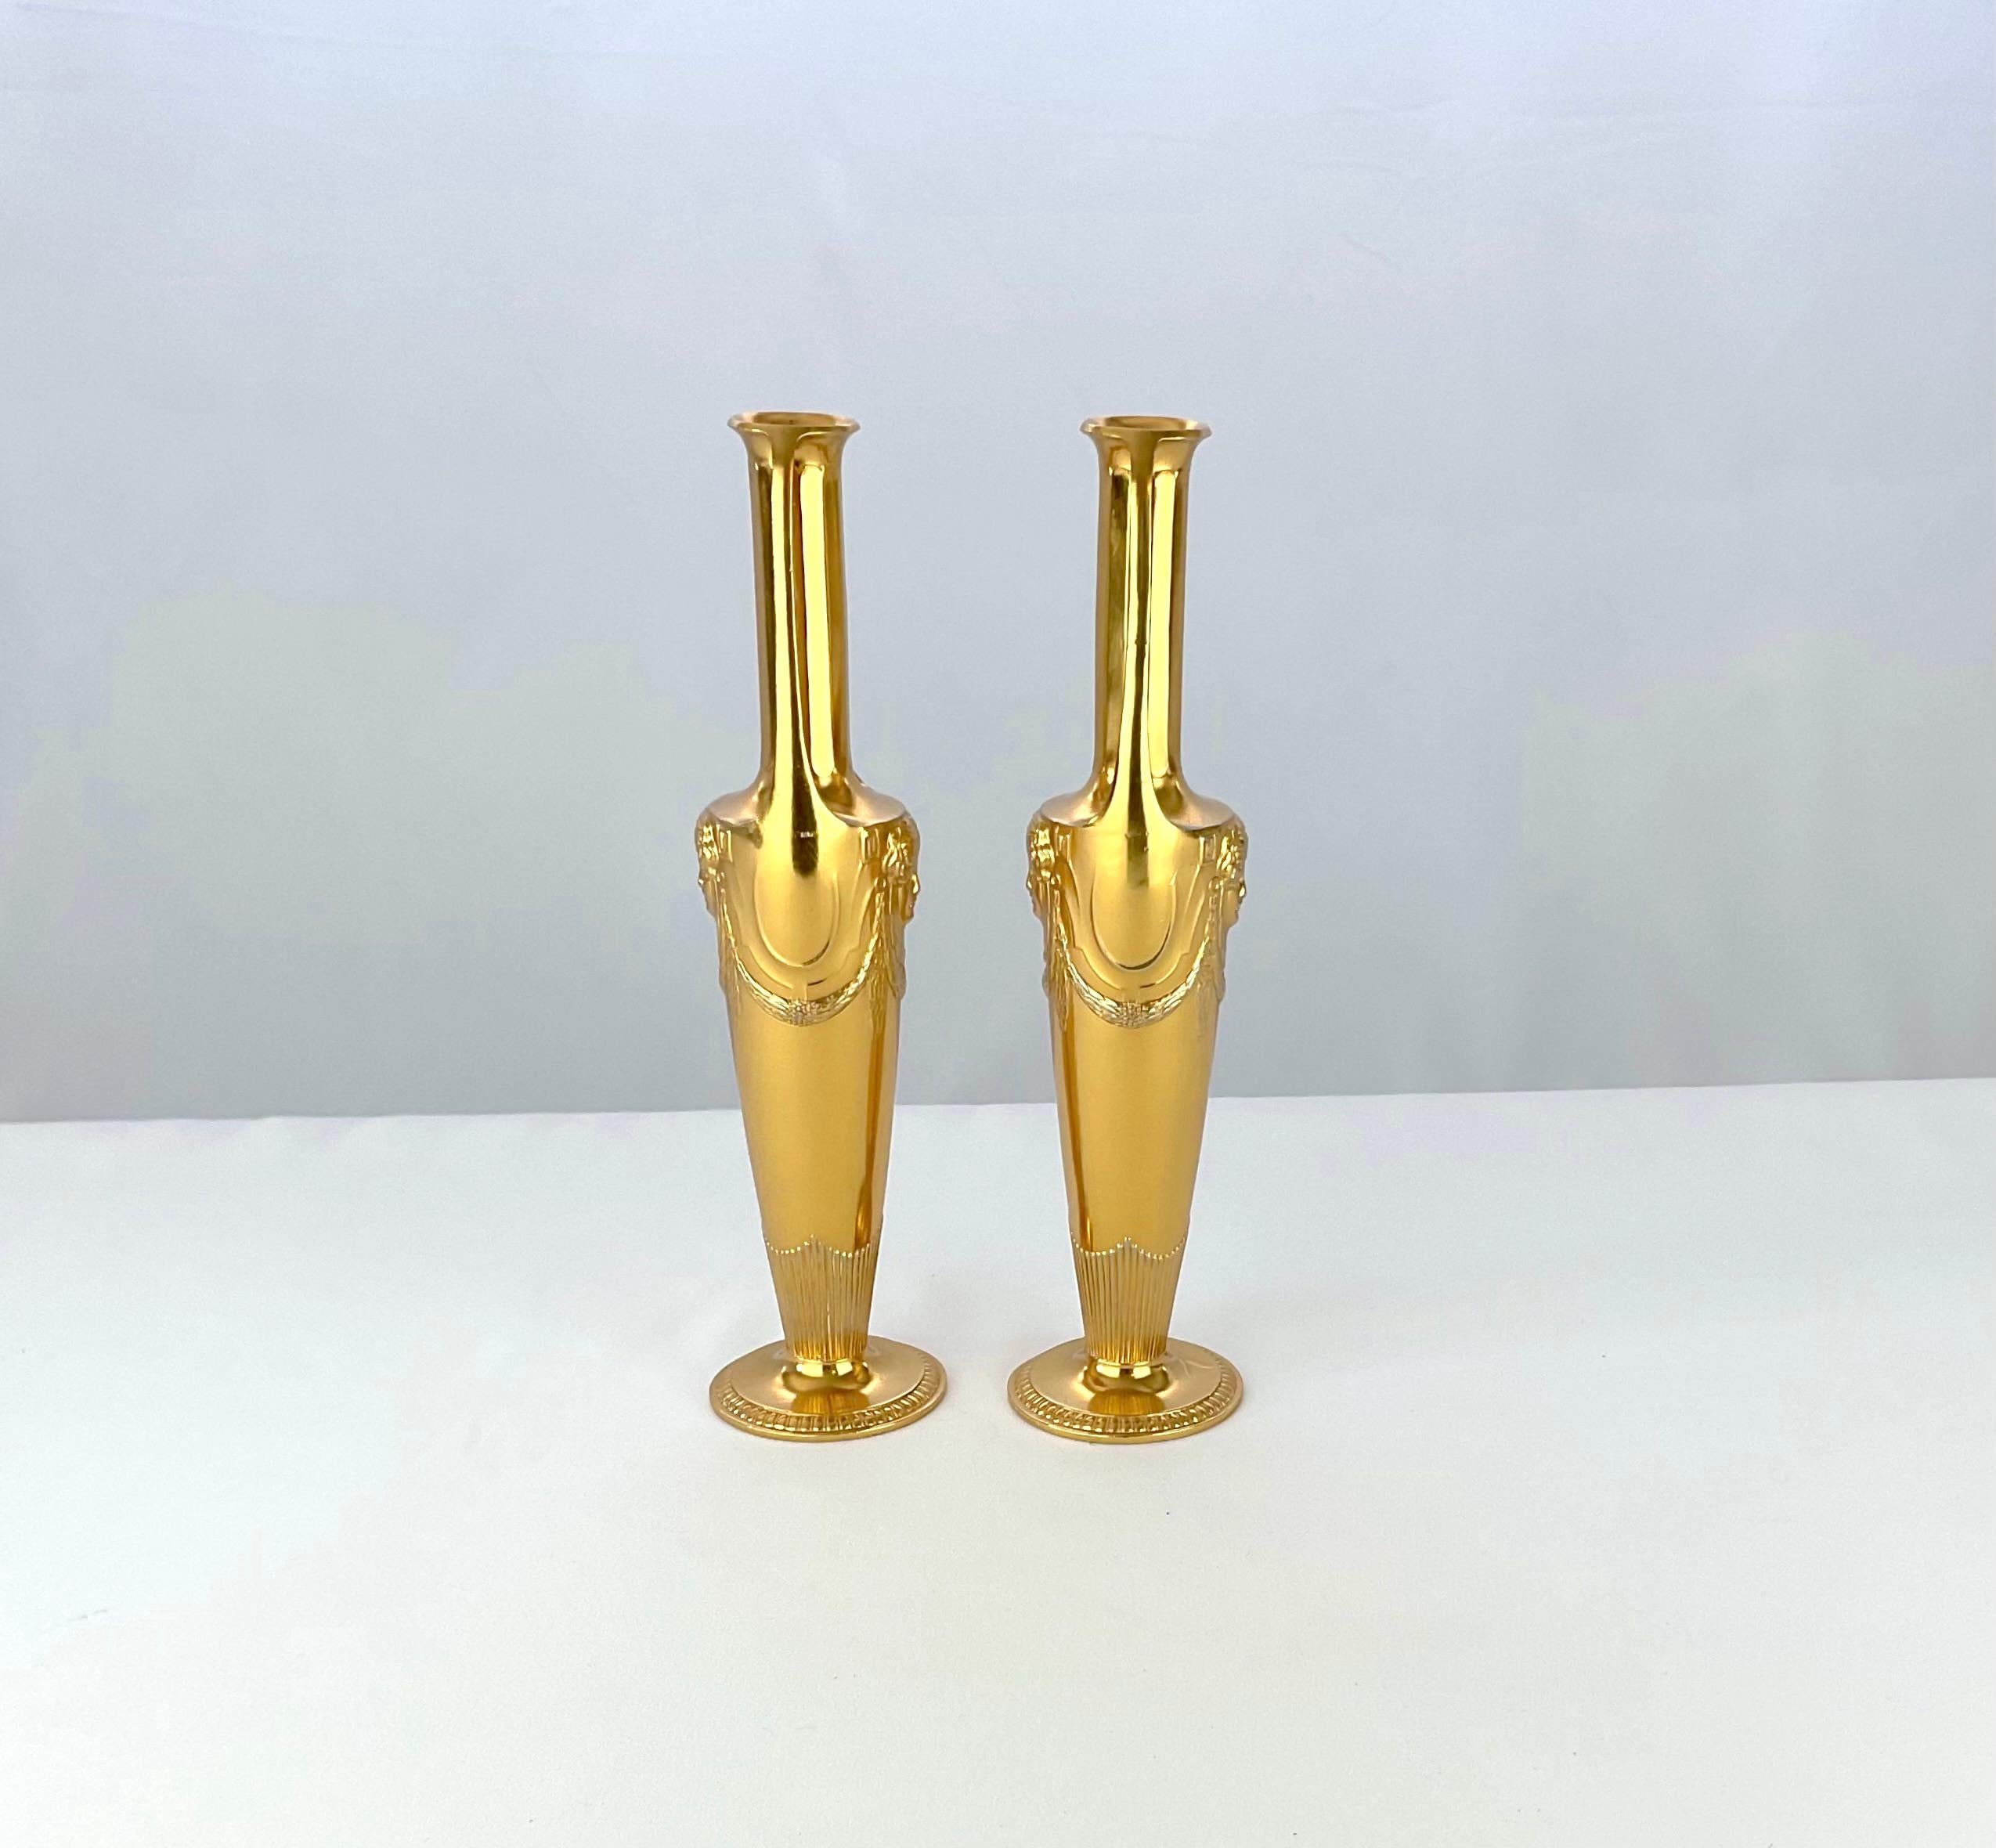 Antique Gilt Metal Vase Pair in Neoclassical Style by Orivit AG of Germany In Good Condition For Sale In Los Angeles, CA